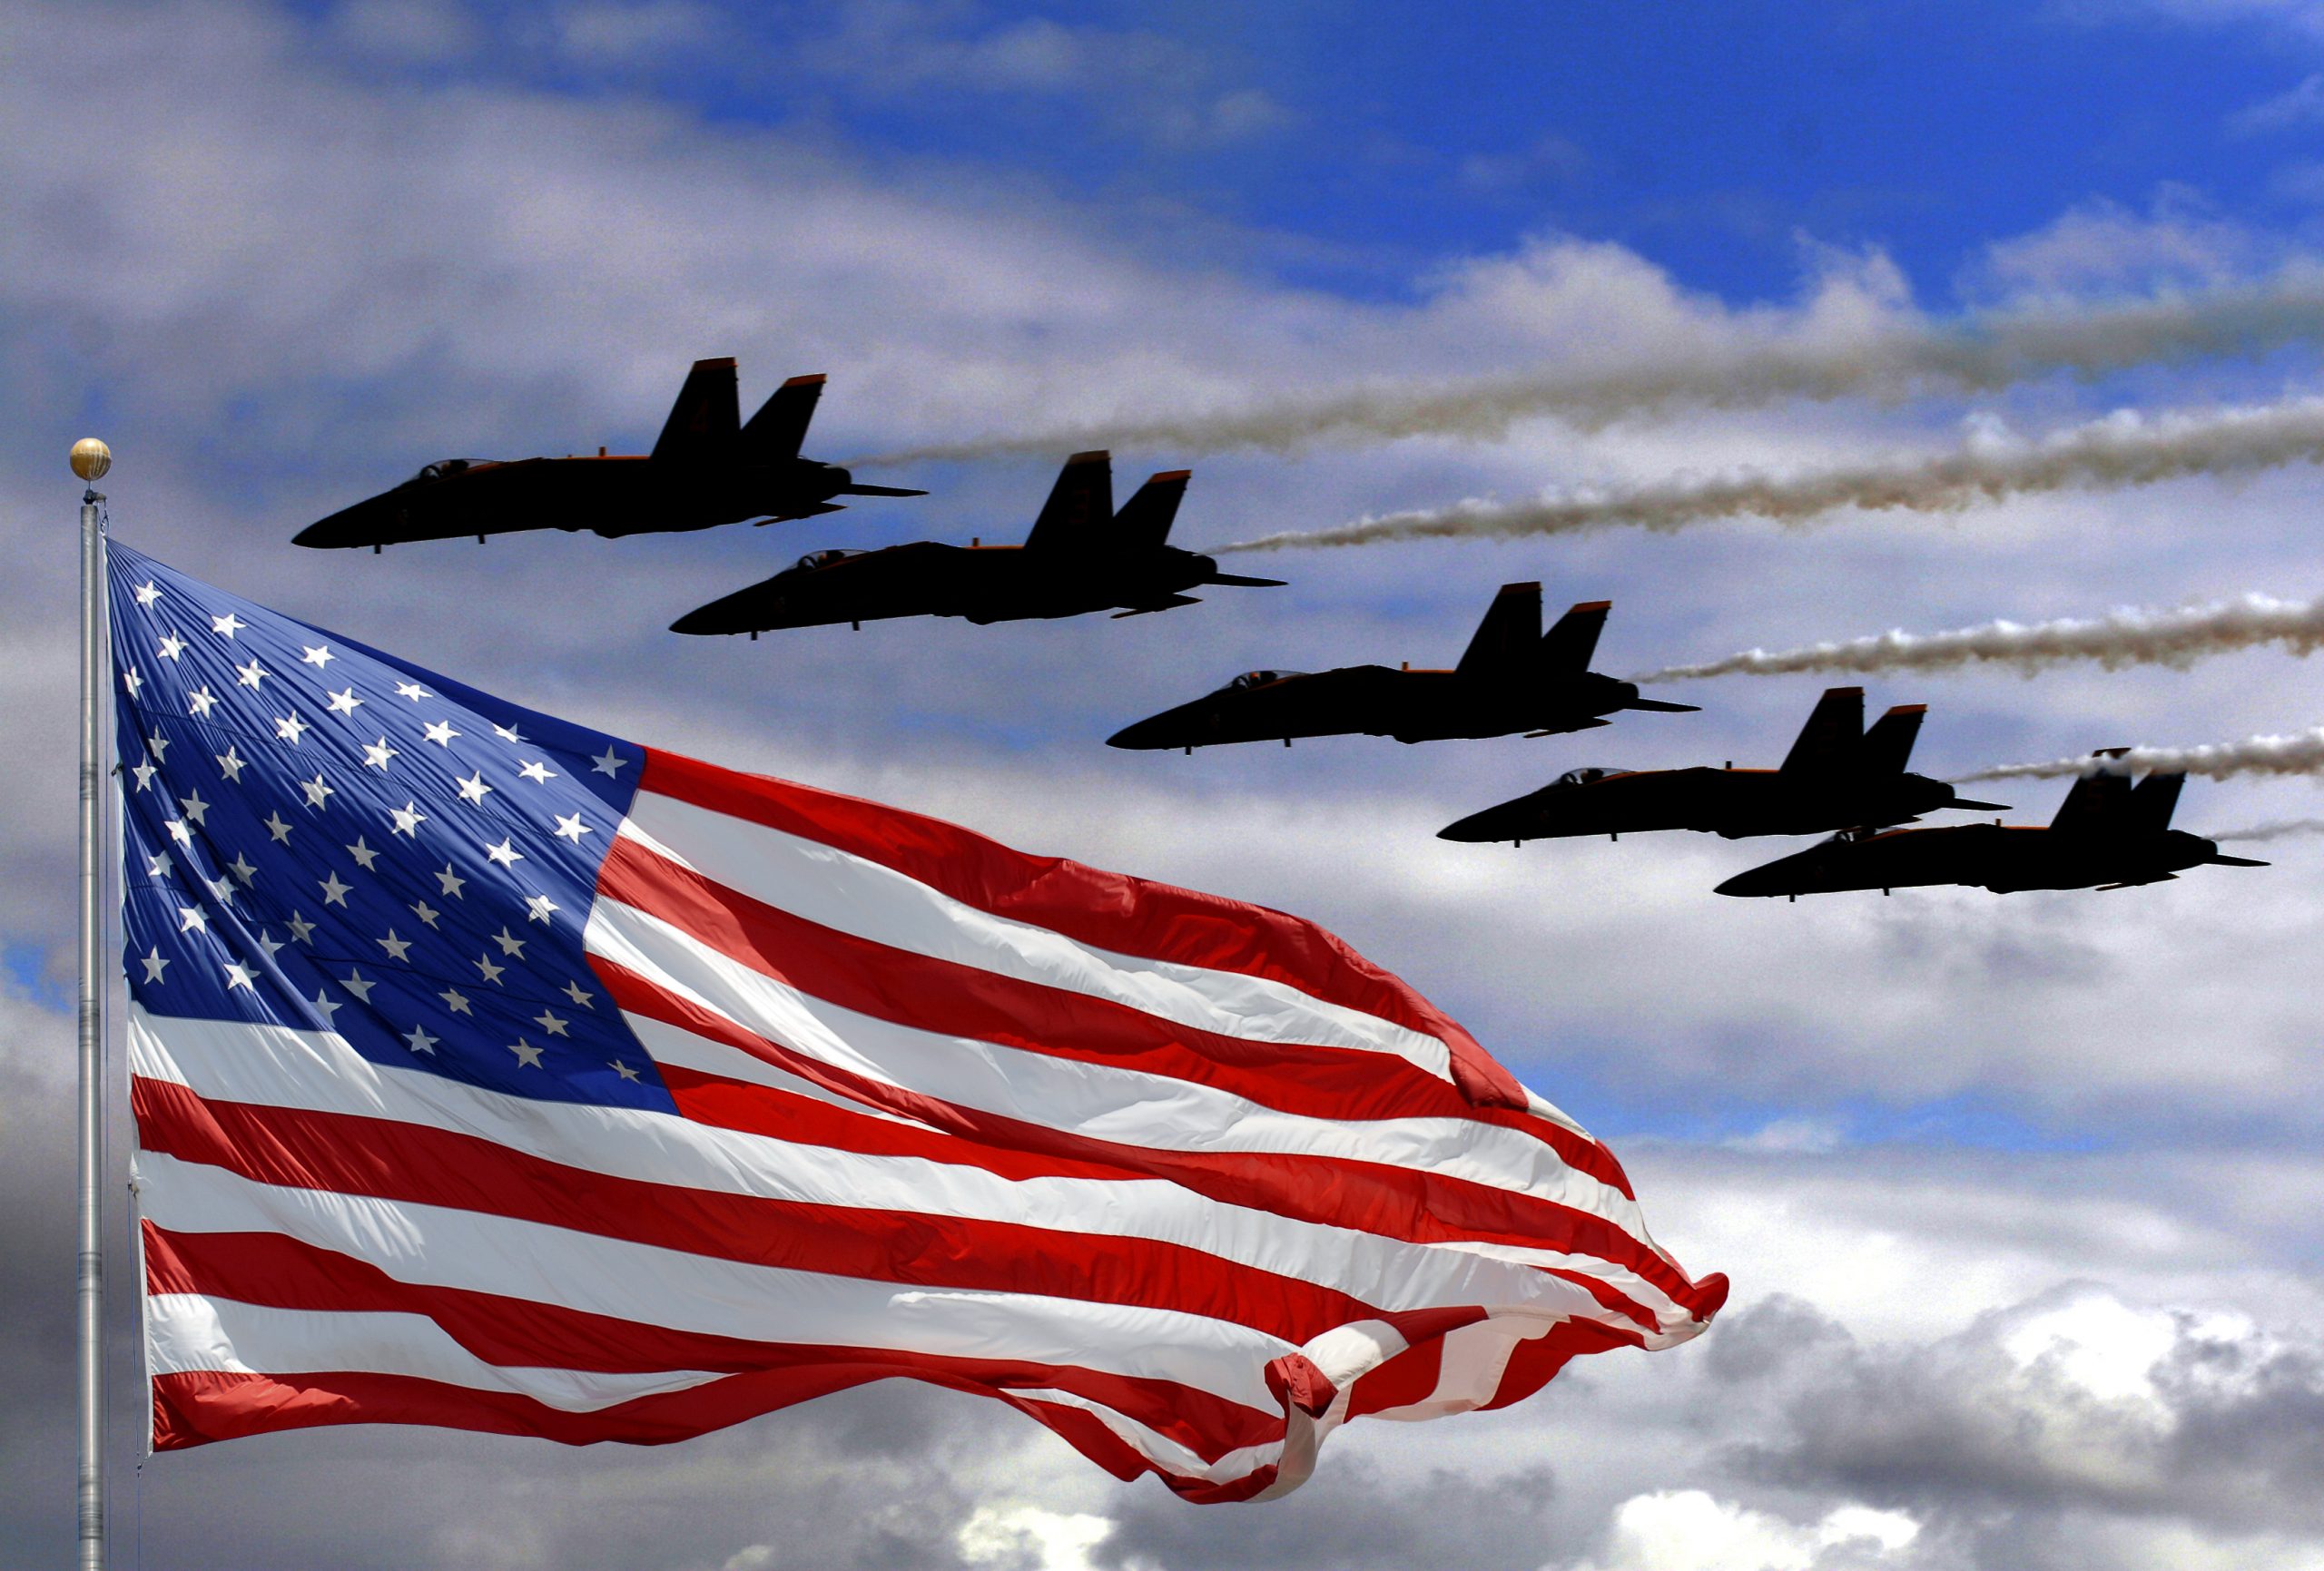 Blue Angels and an American Flag in composite.